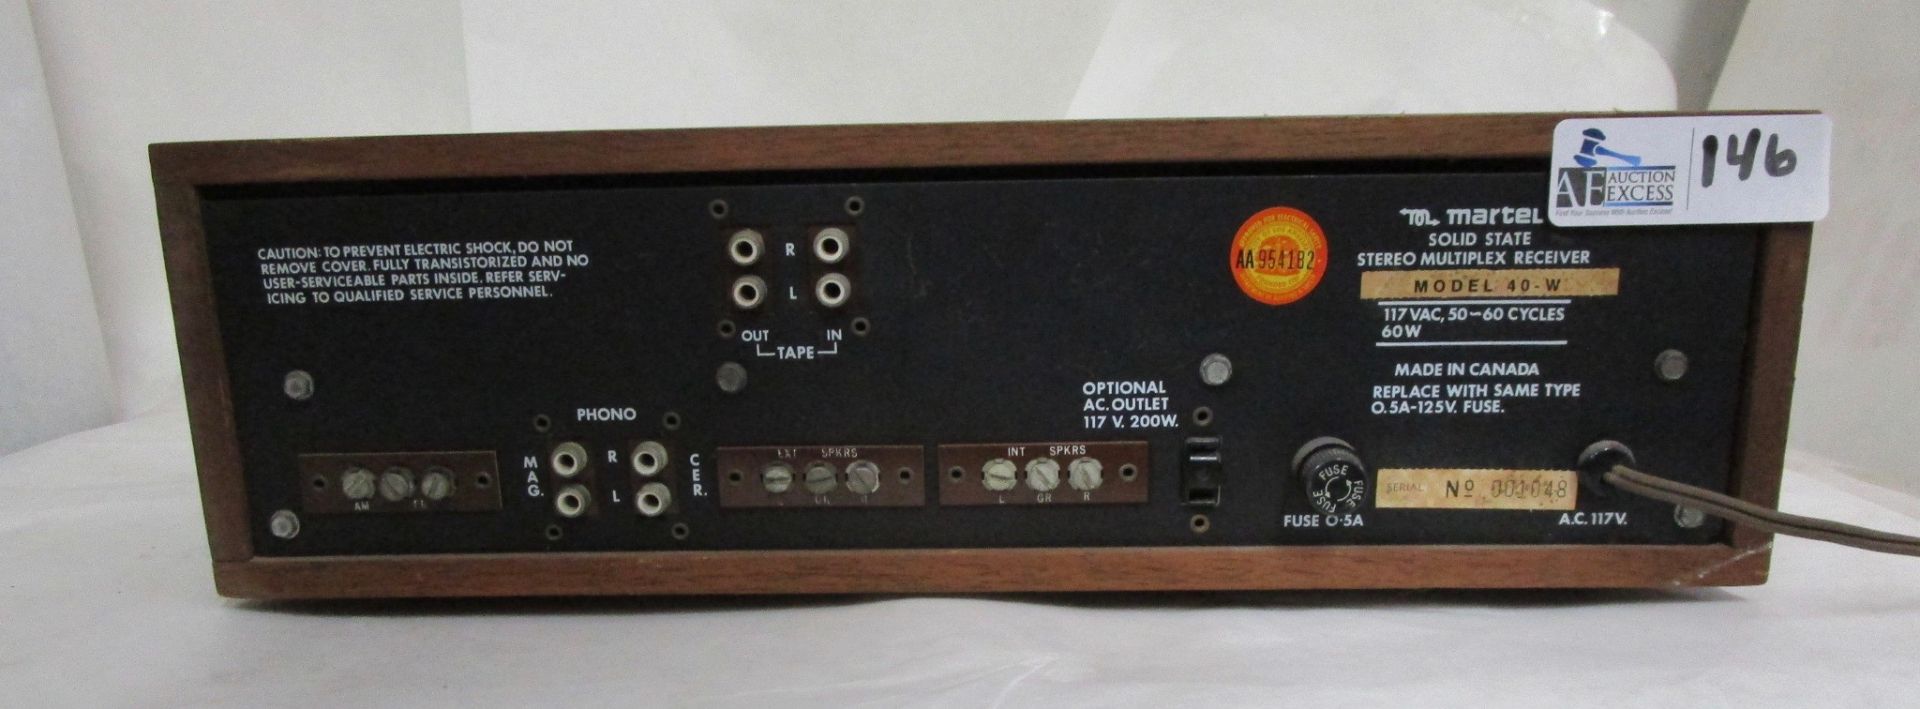 MARTEL AM/FM STEREO RECEIVER MODEL 40W - Image 2 of 2